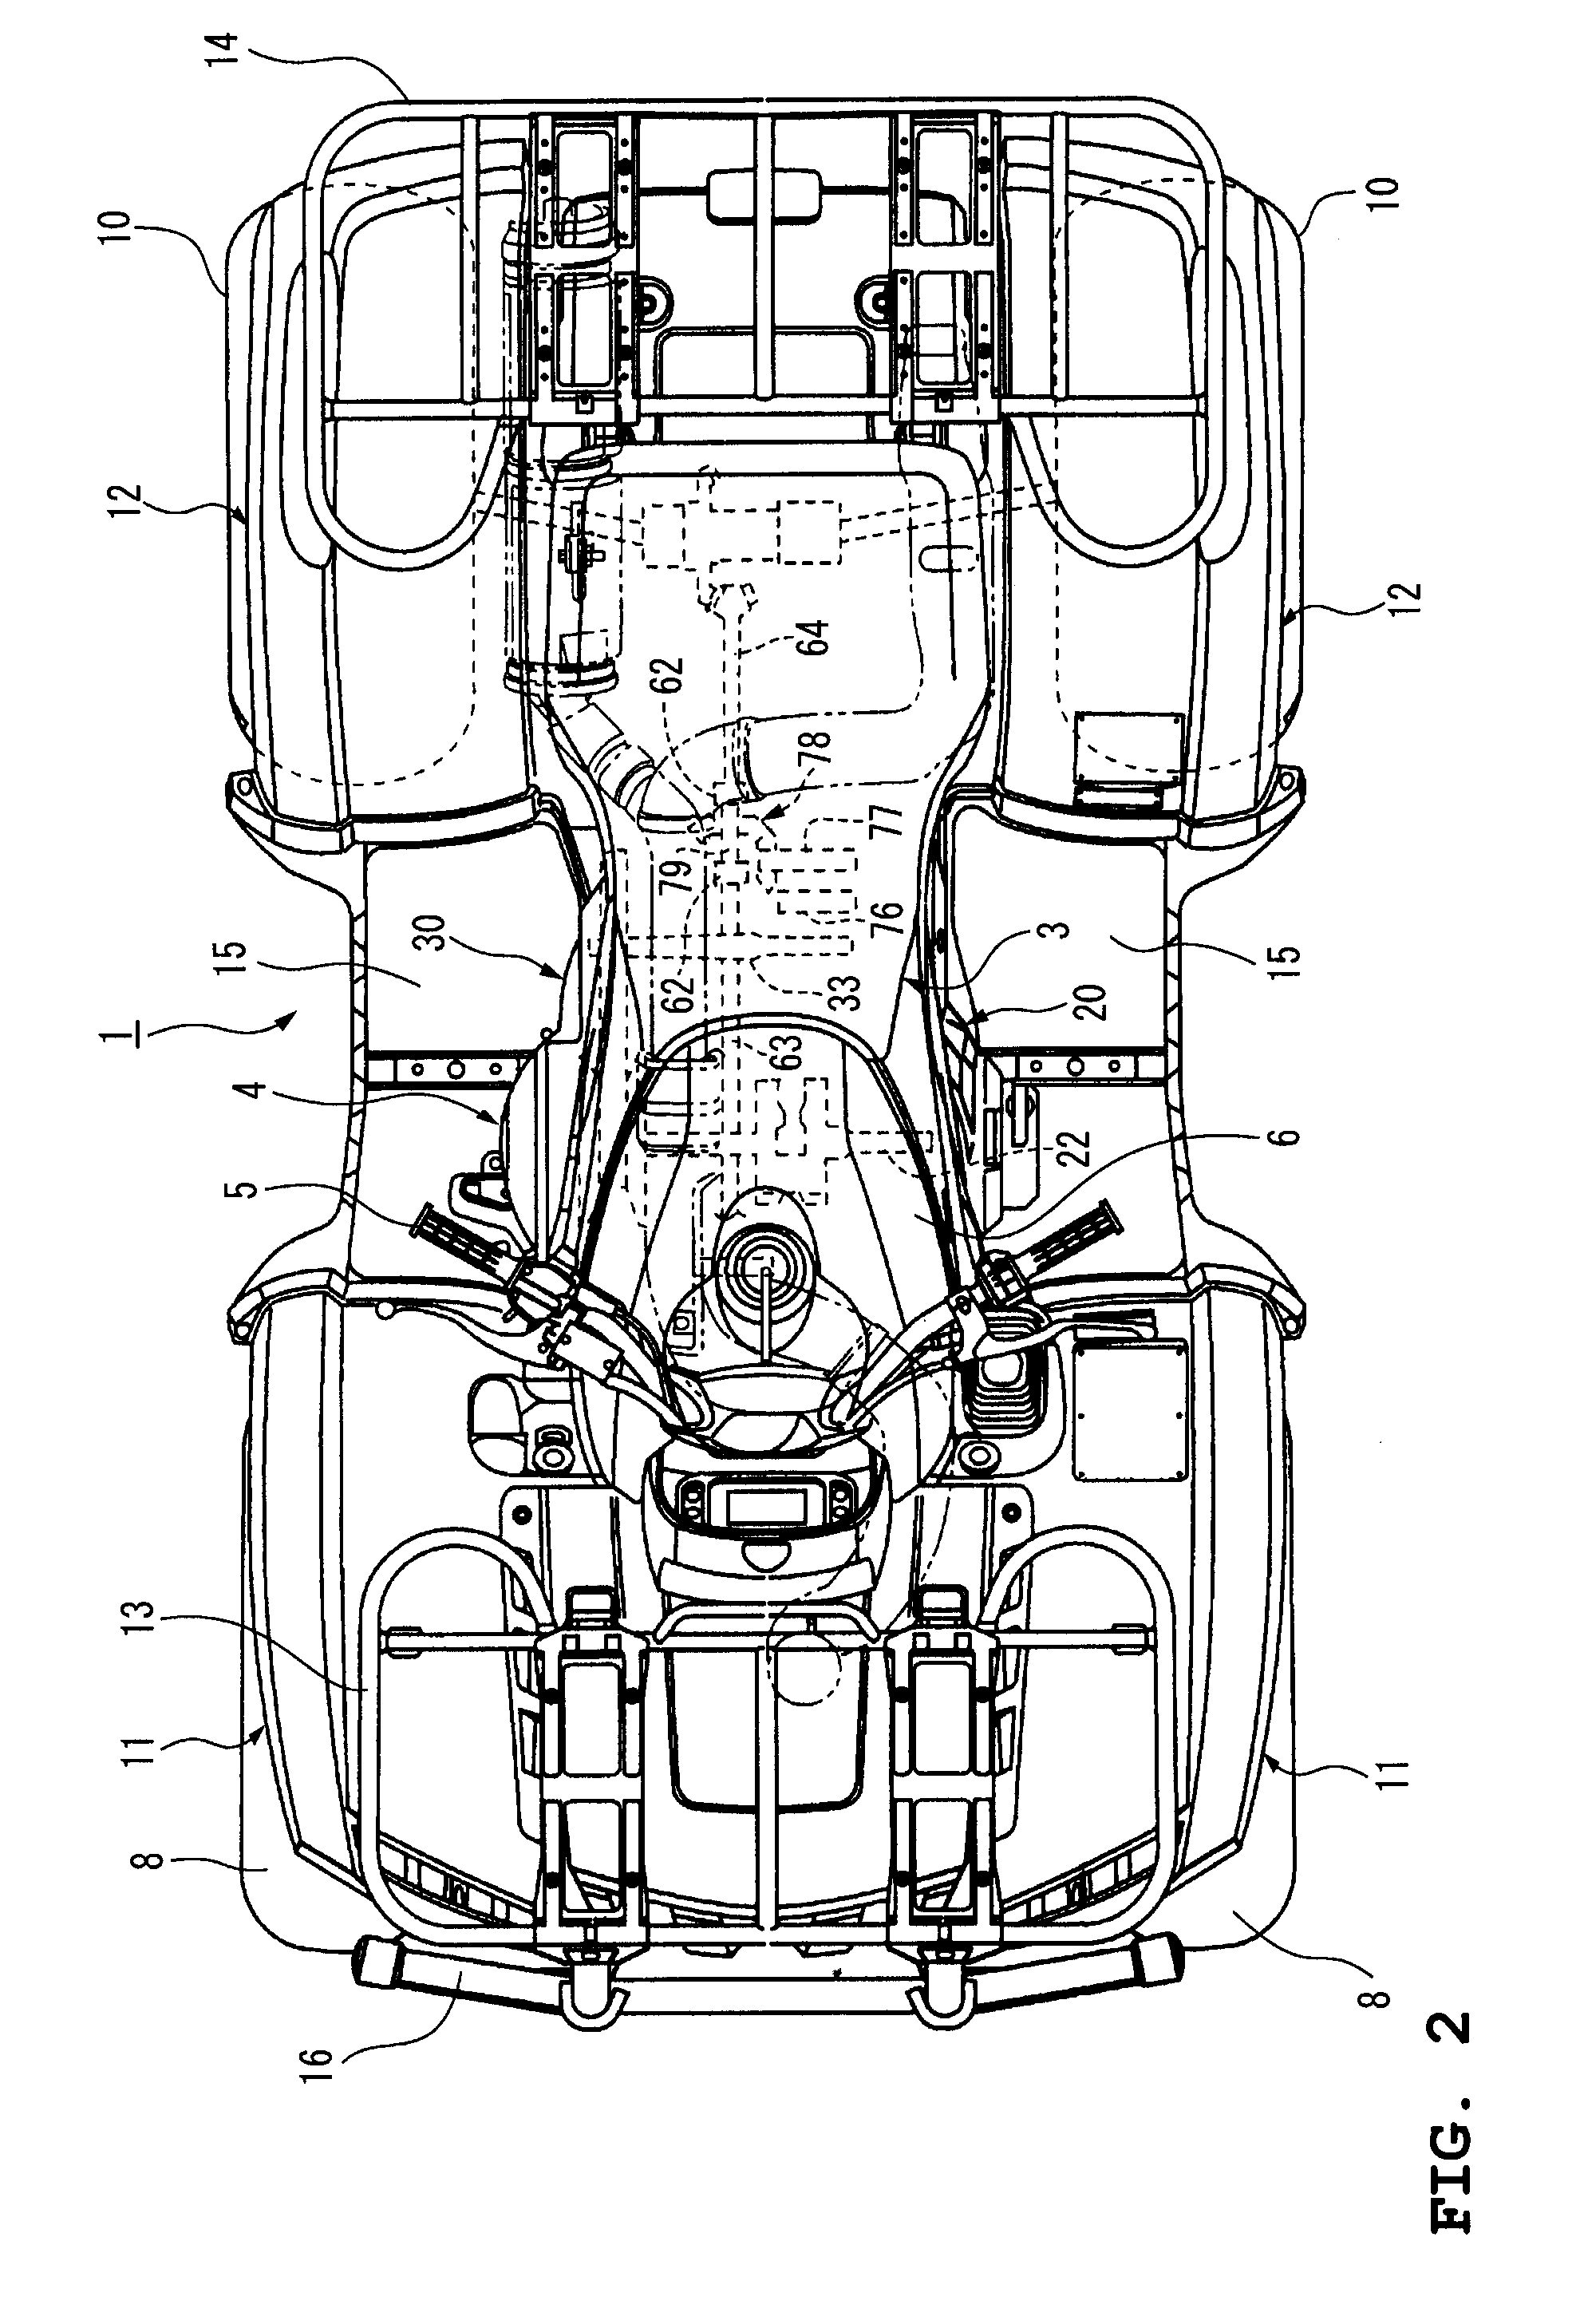 V-belt continuously variable transmission and straddle-type vehicle